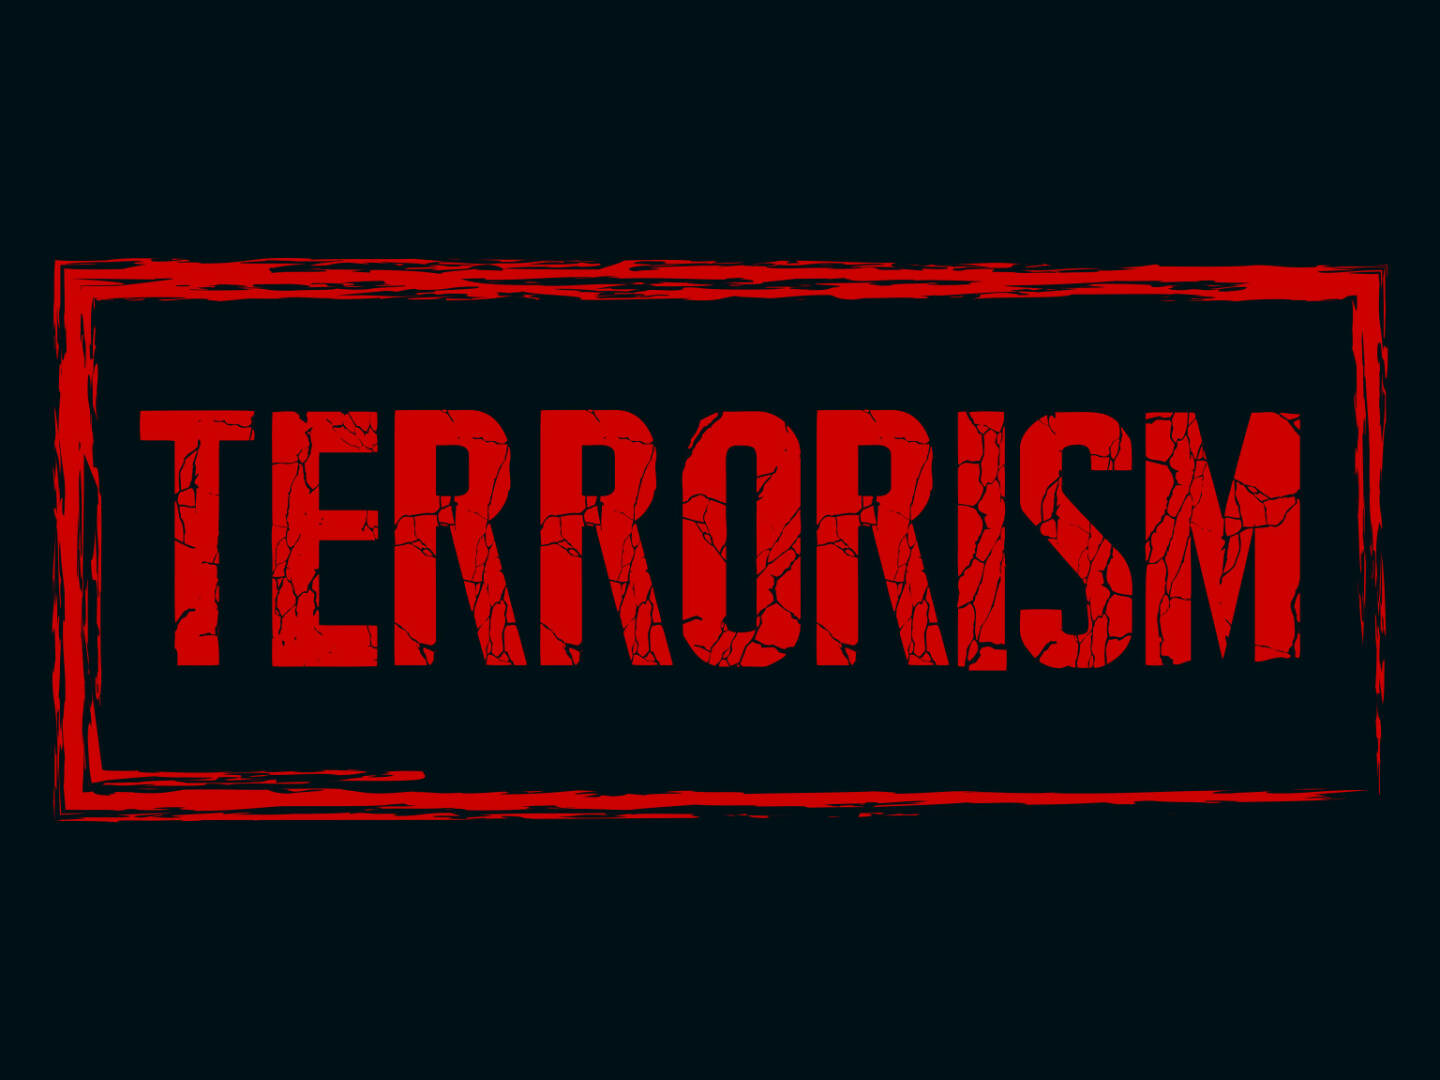 Terror, Terrorismus http://www.shutterstock.com/de/pic-275557637/stock-vector-creative-vector-illustration-of-terrorism-with-nice-and-creative-red-colour-outlined-in-a-black.html